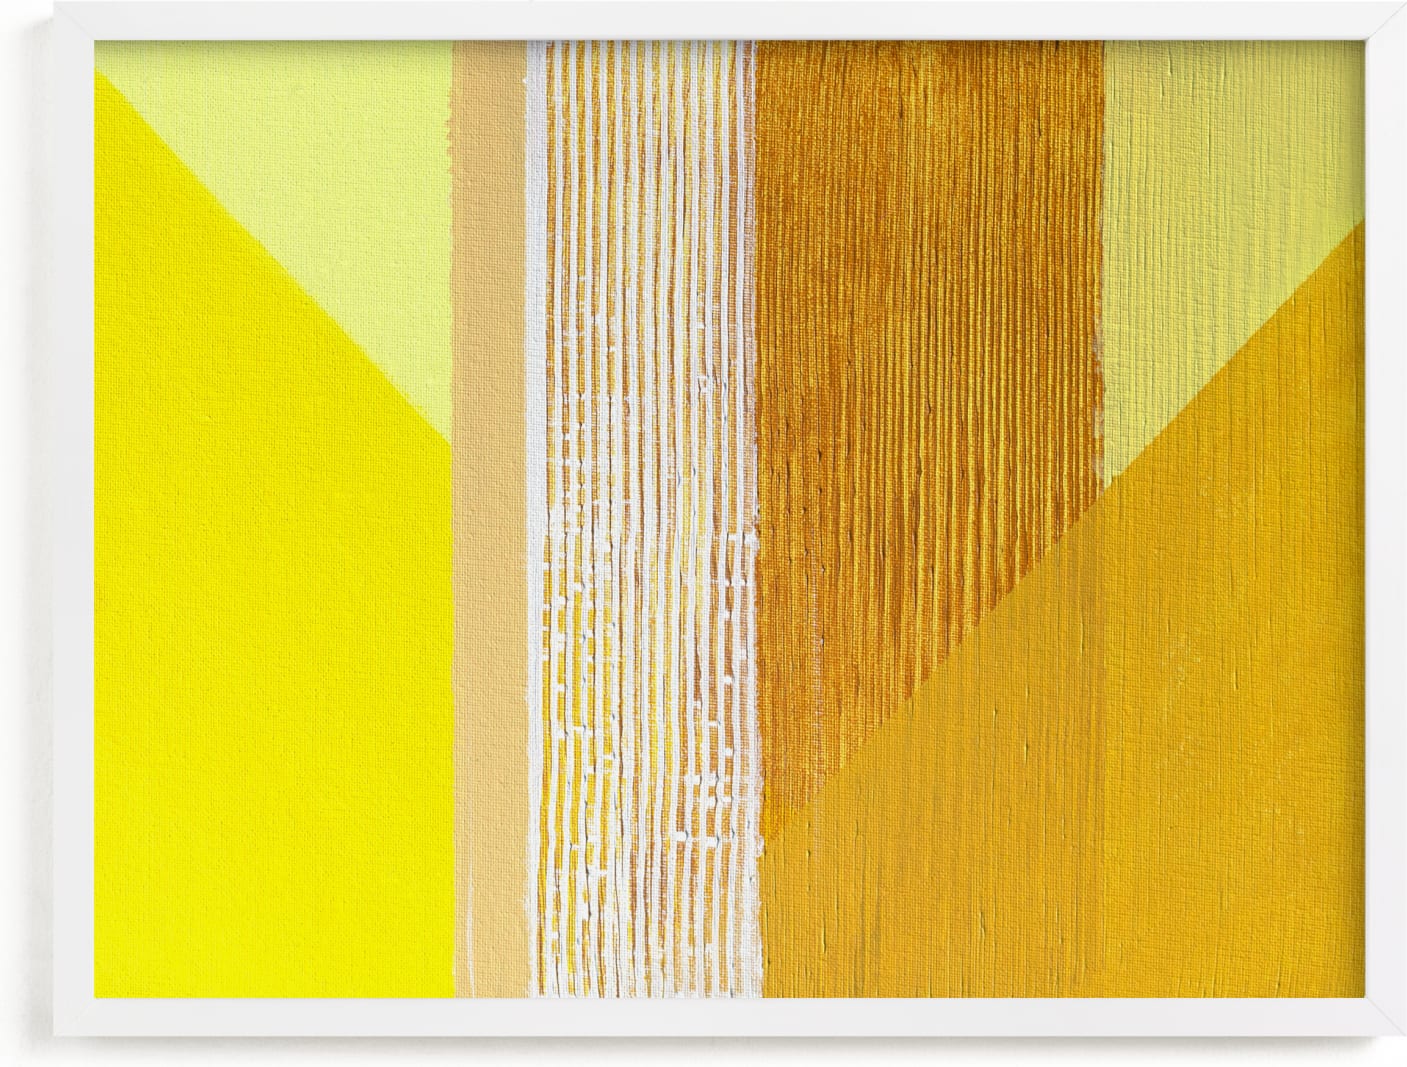 This is a white, yellow, gold art by Jen Florentine called Hues.